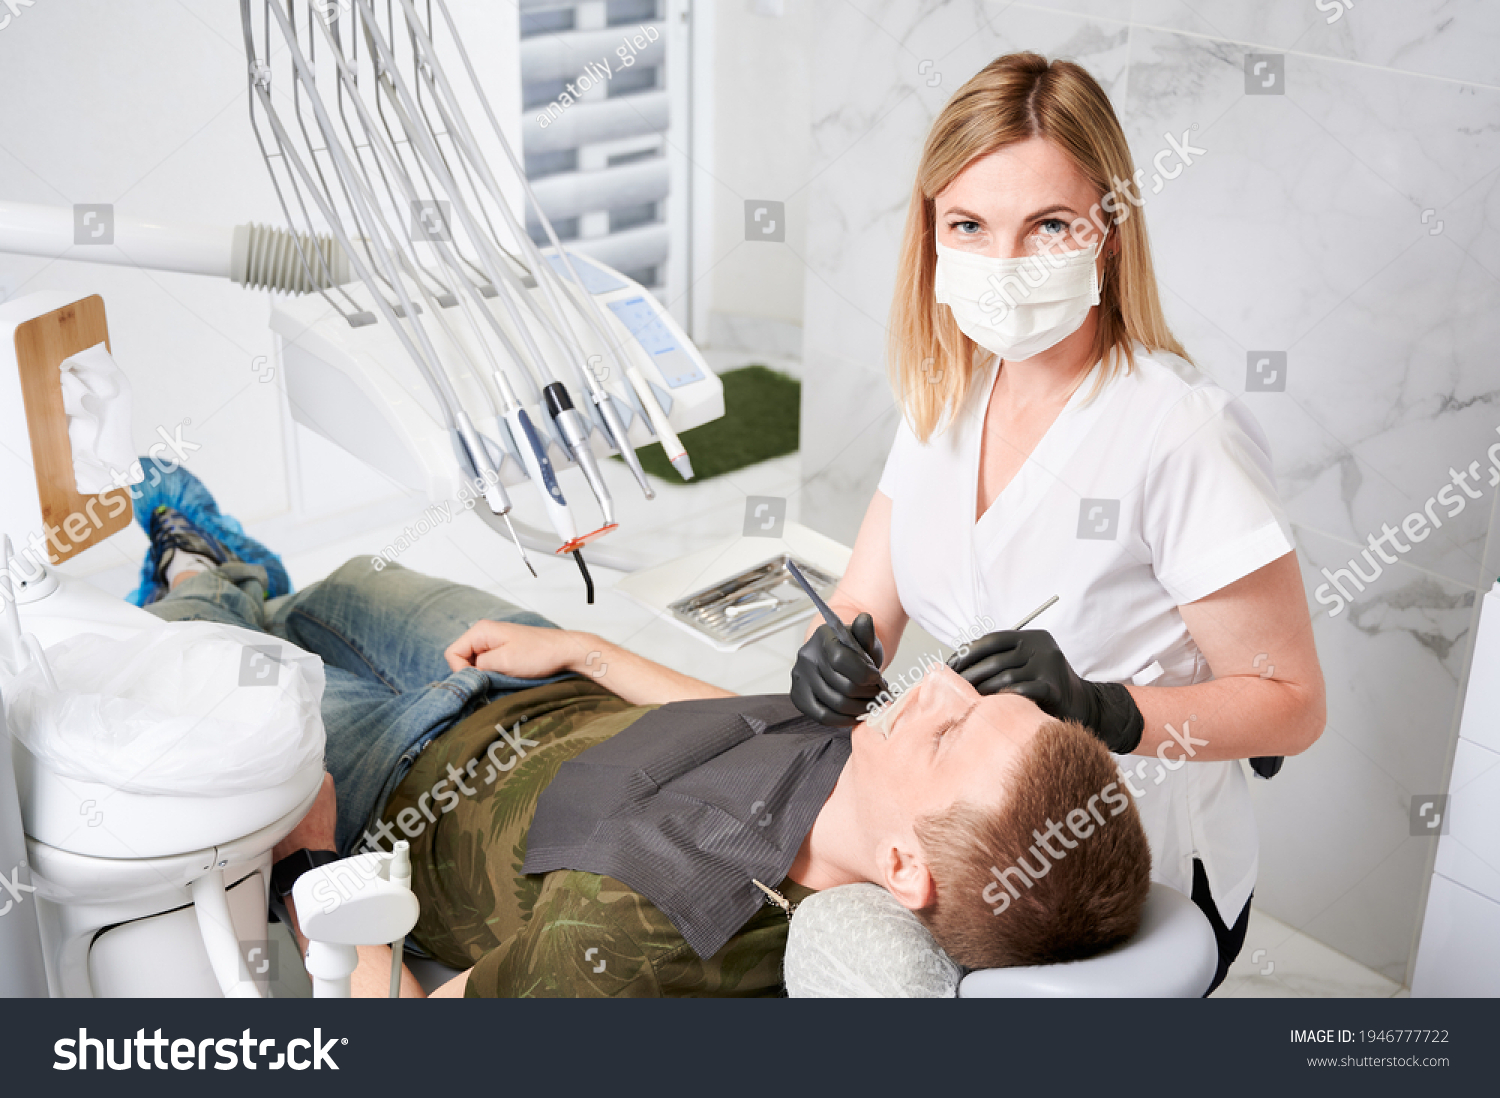 Young man receiving orthodontic treatment in dental office. #1946777722